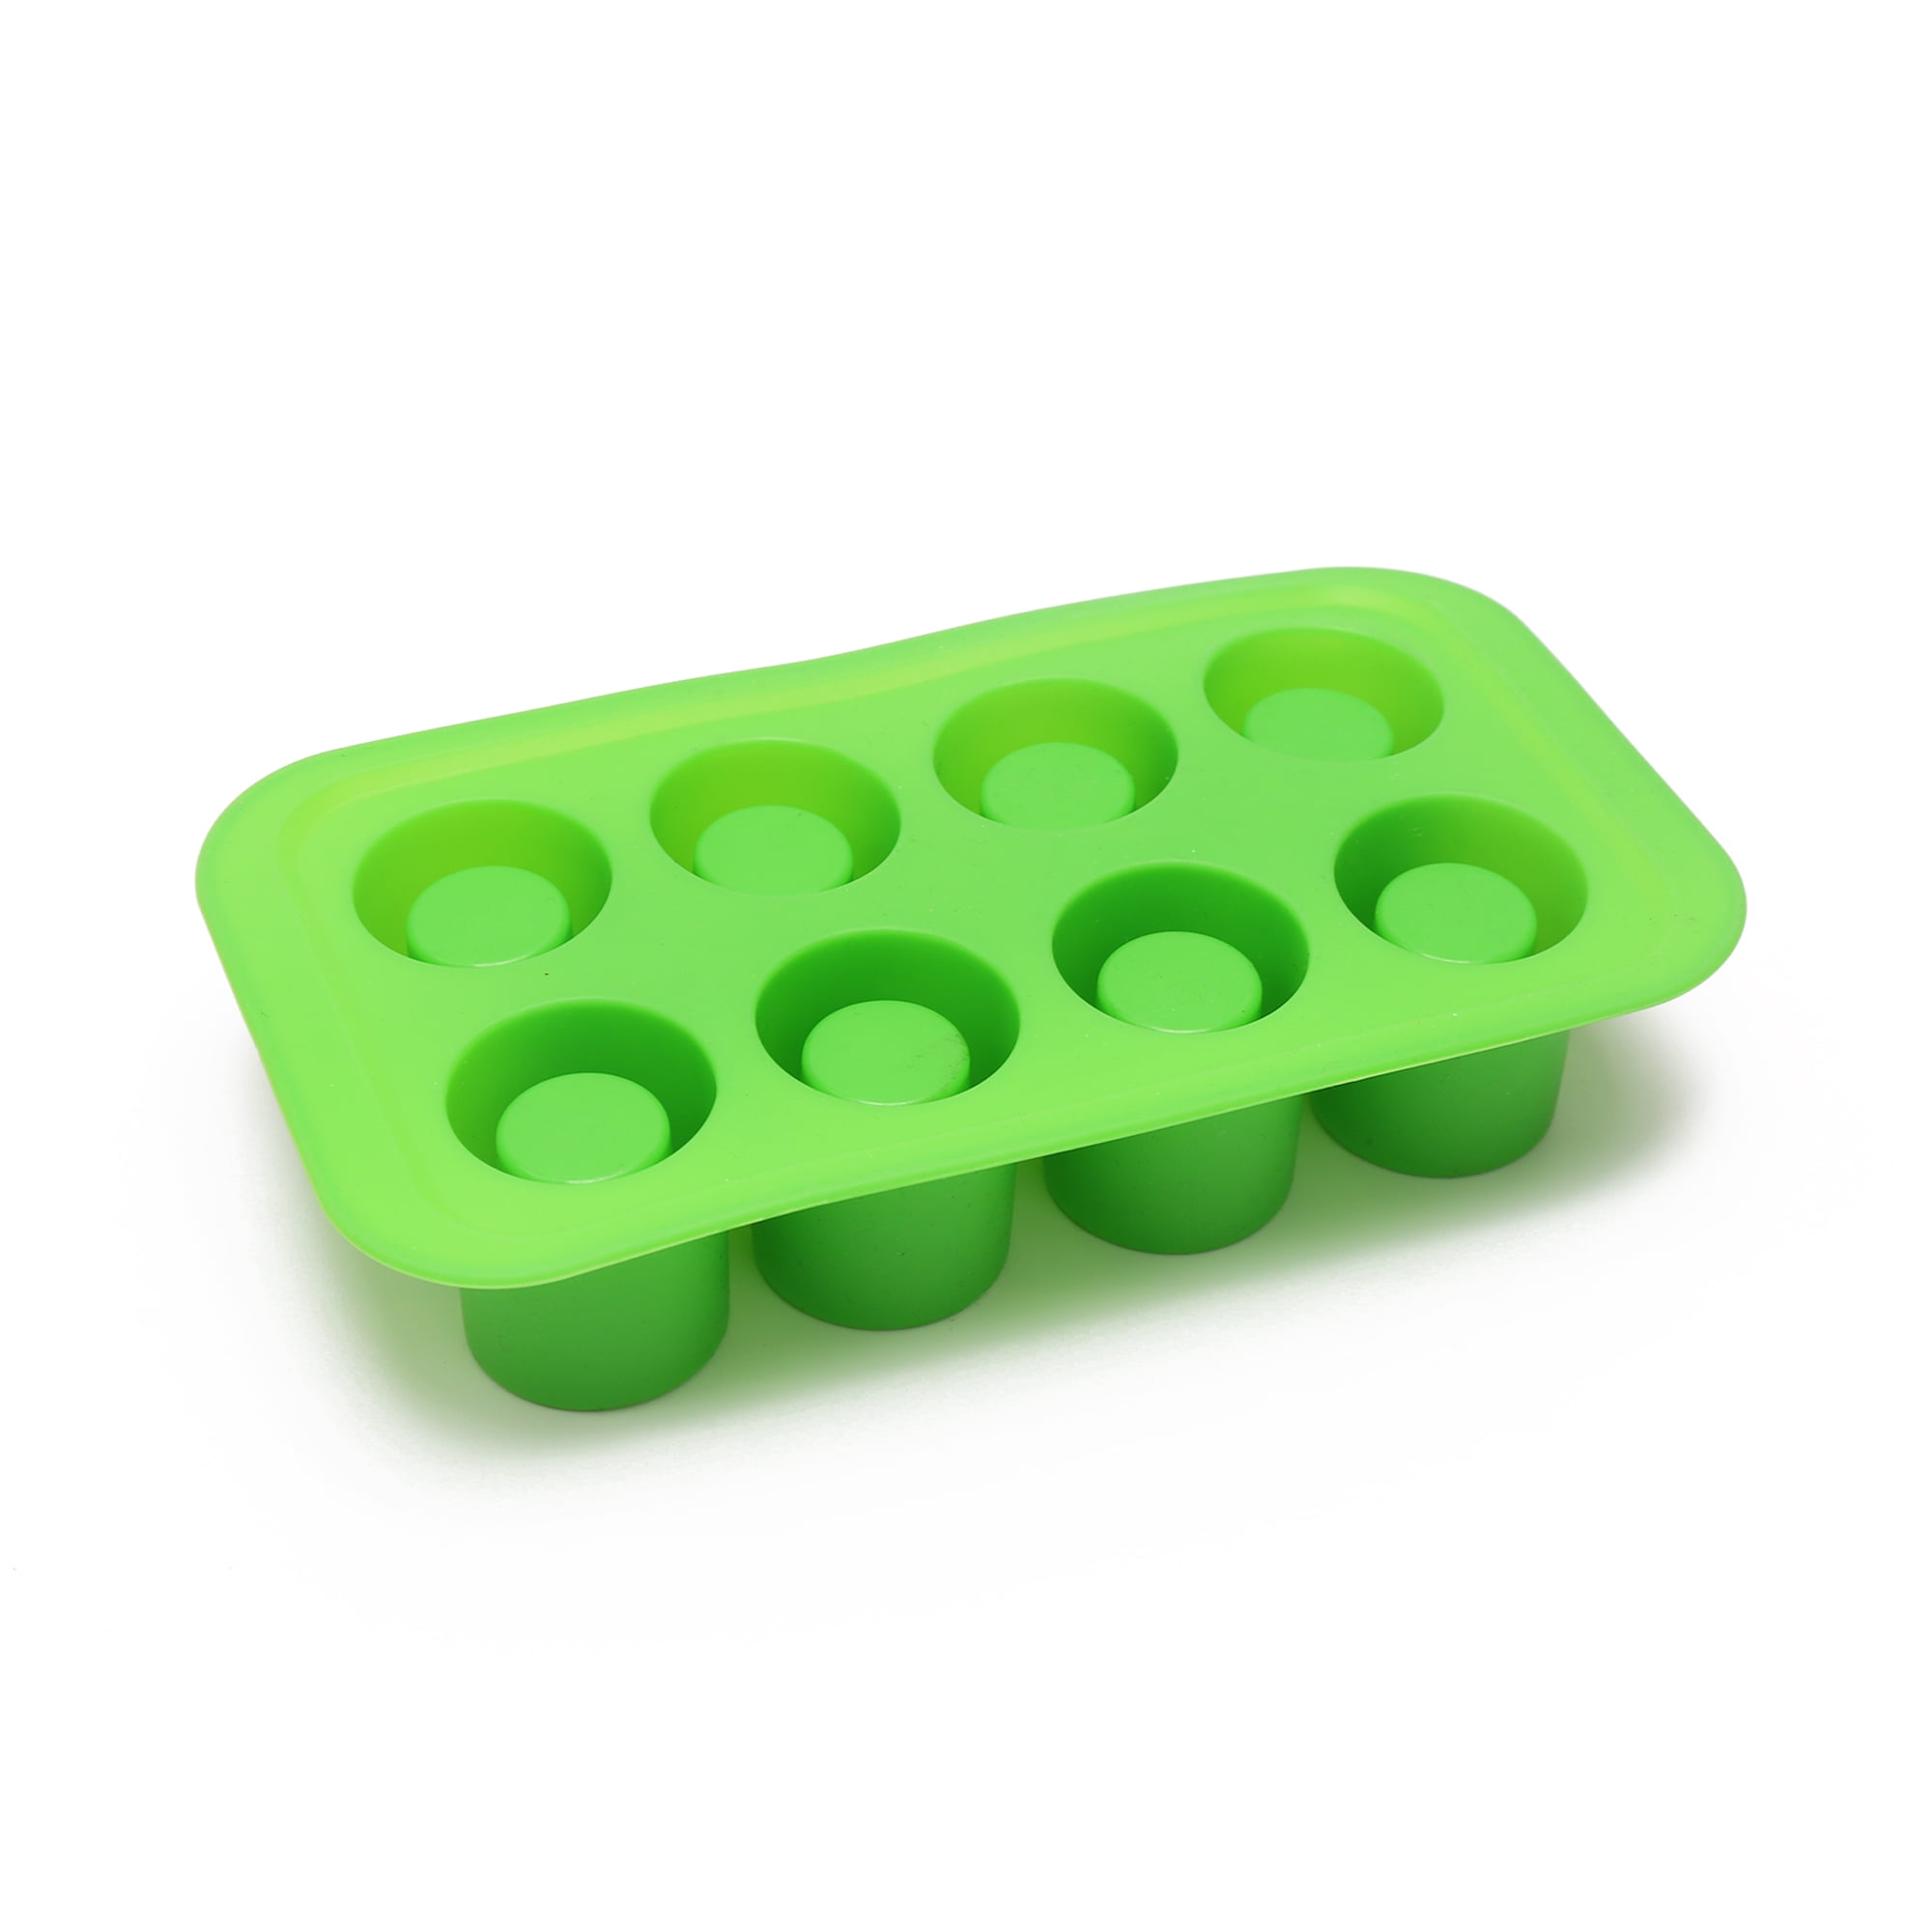 MochiThings: Colorful Silicone Tray